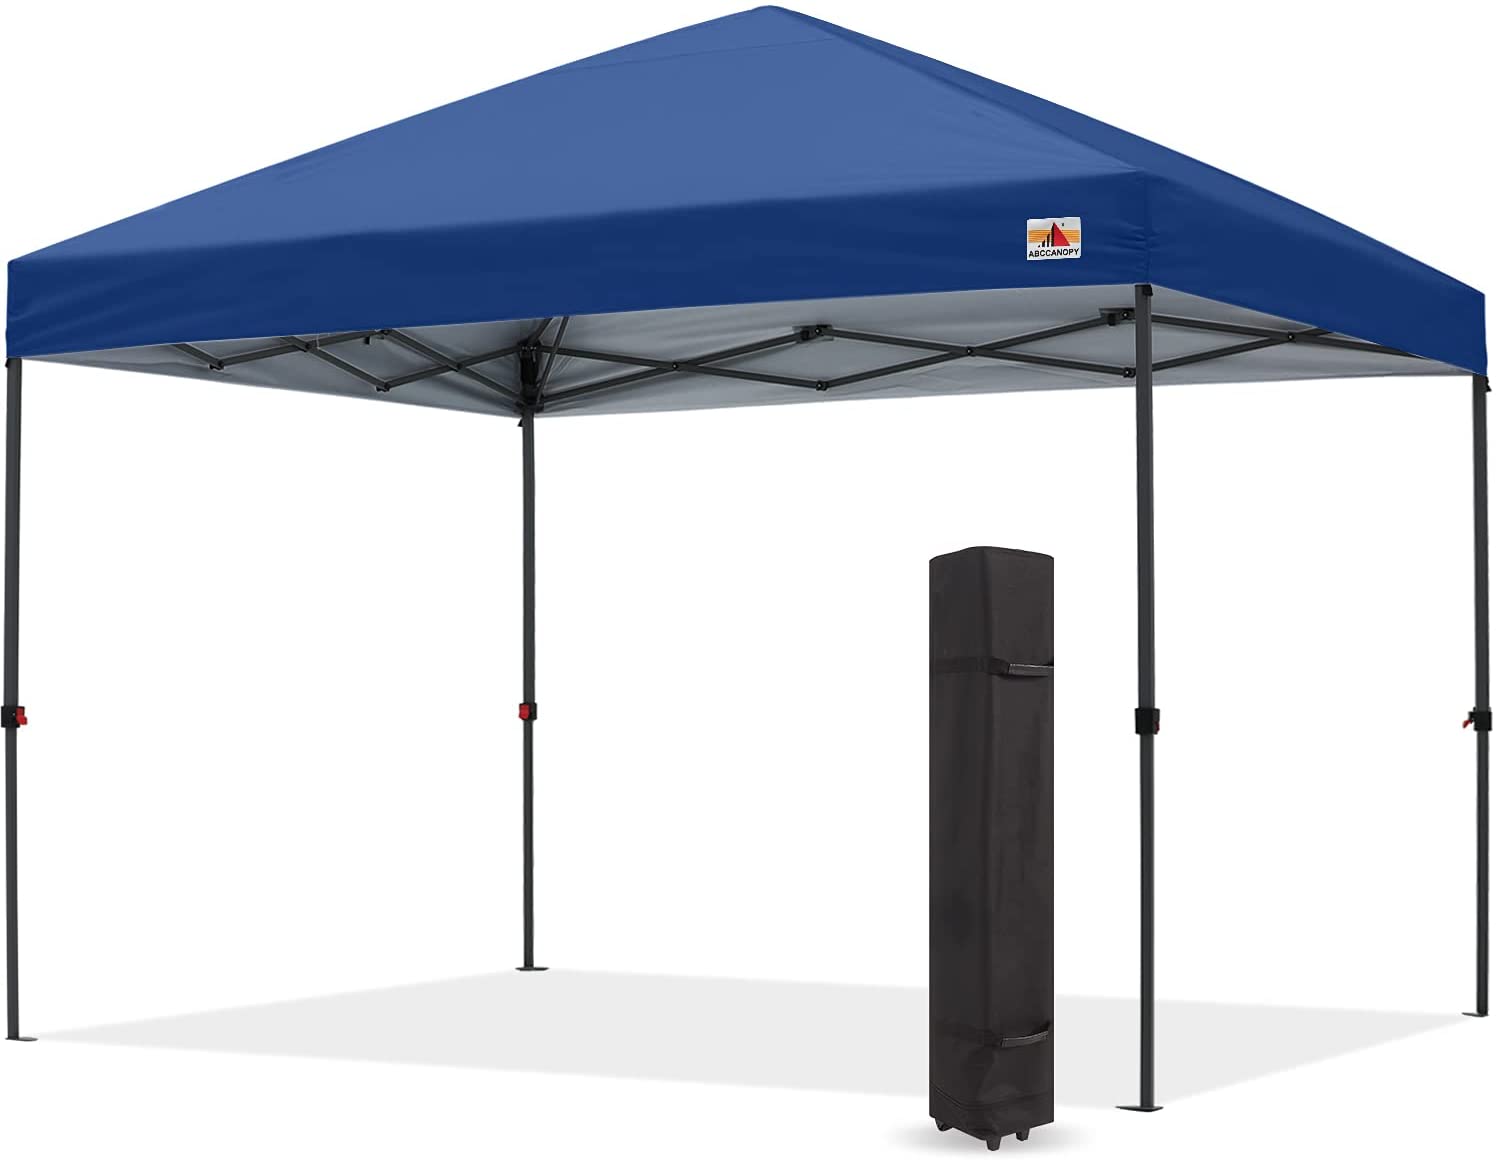 ABCCANOPY Durable Easy Pop up Canopy Tent - ABC-CANOPY